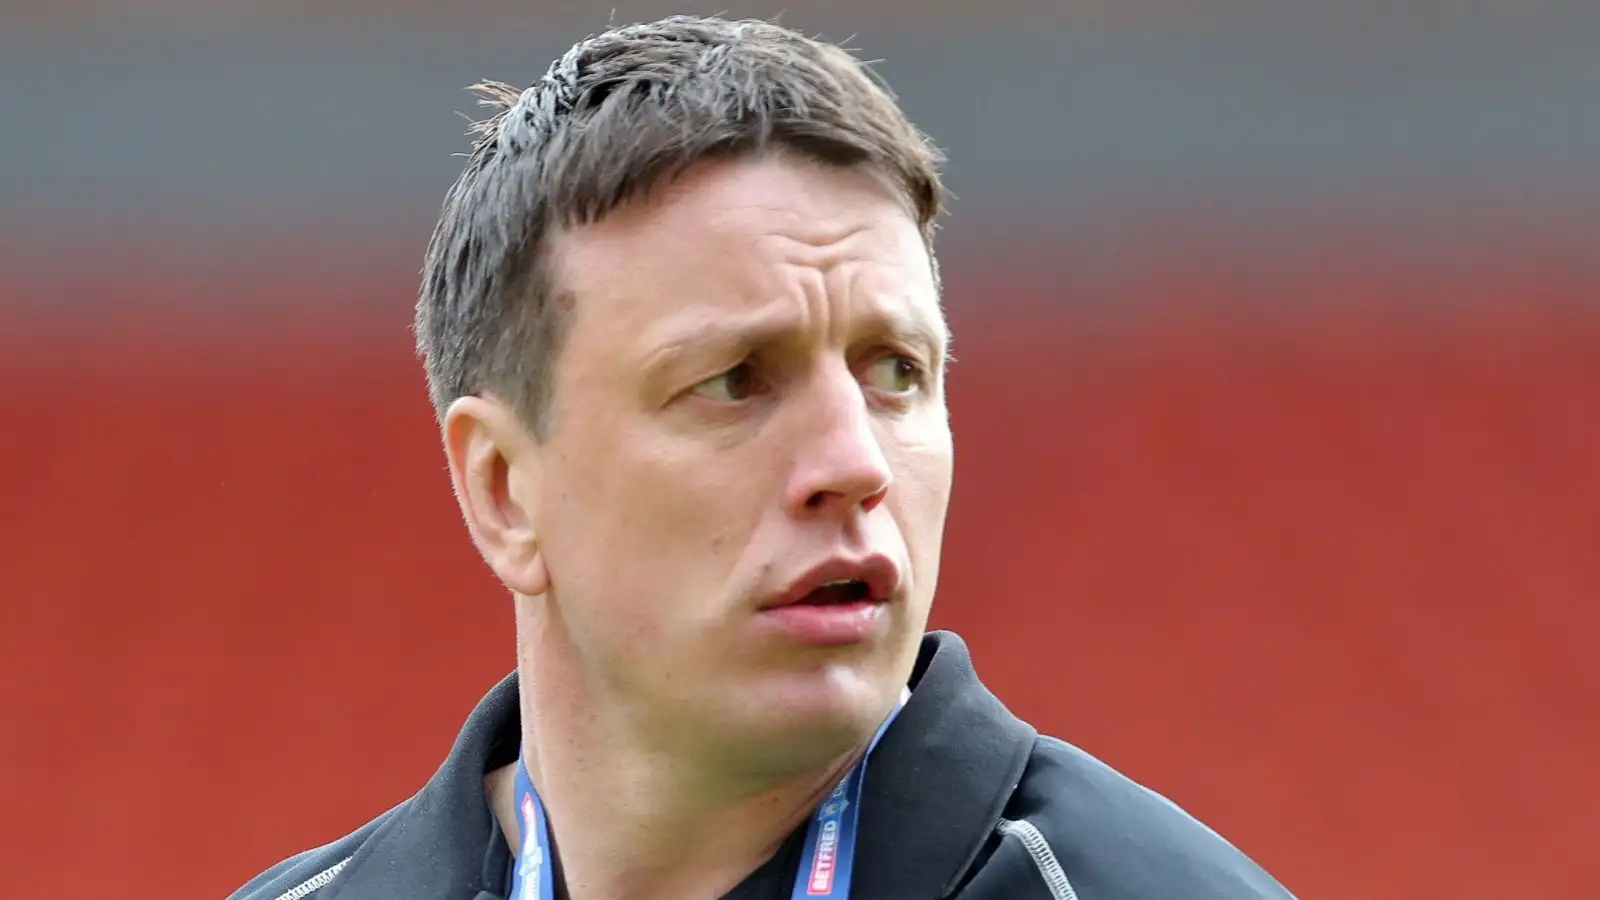 Stuart Littler has been linked with the Widnes Vikings head coach role. Photo by PA Images / Alamy Stock Photo.